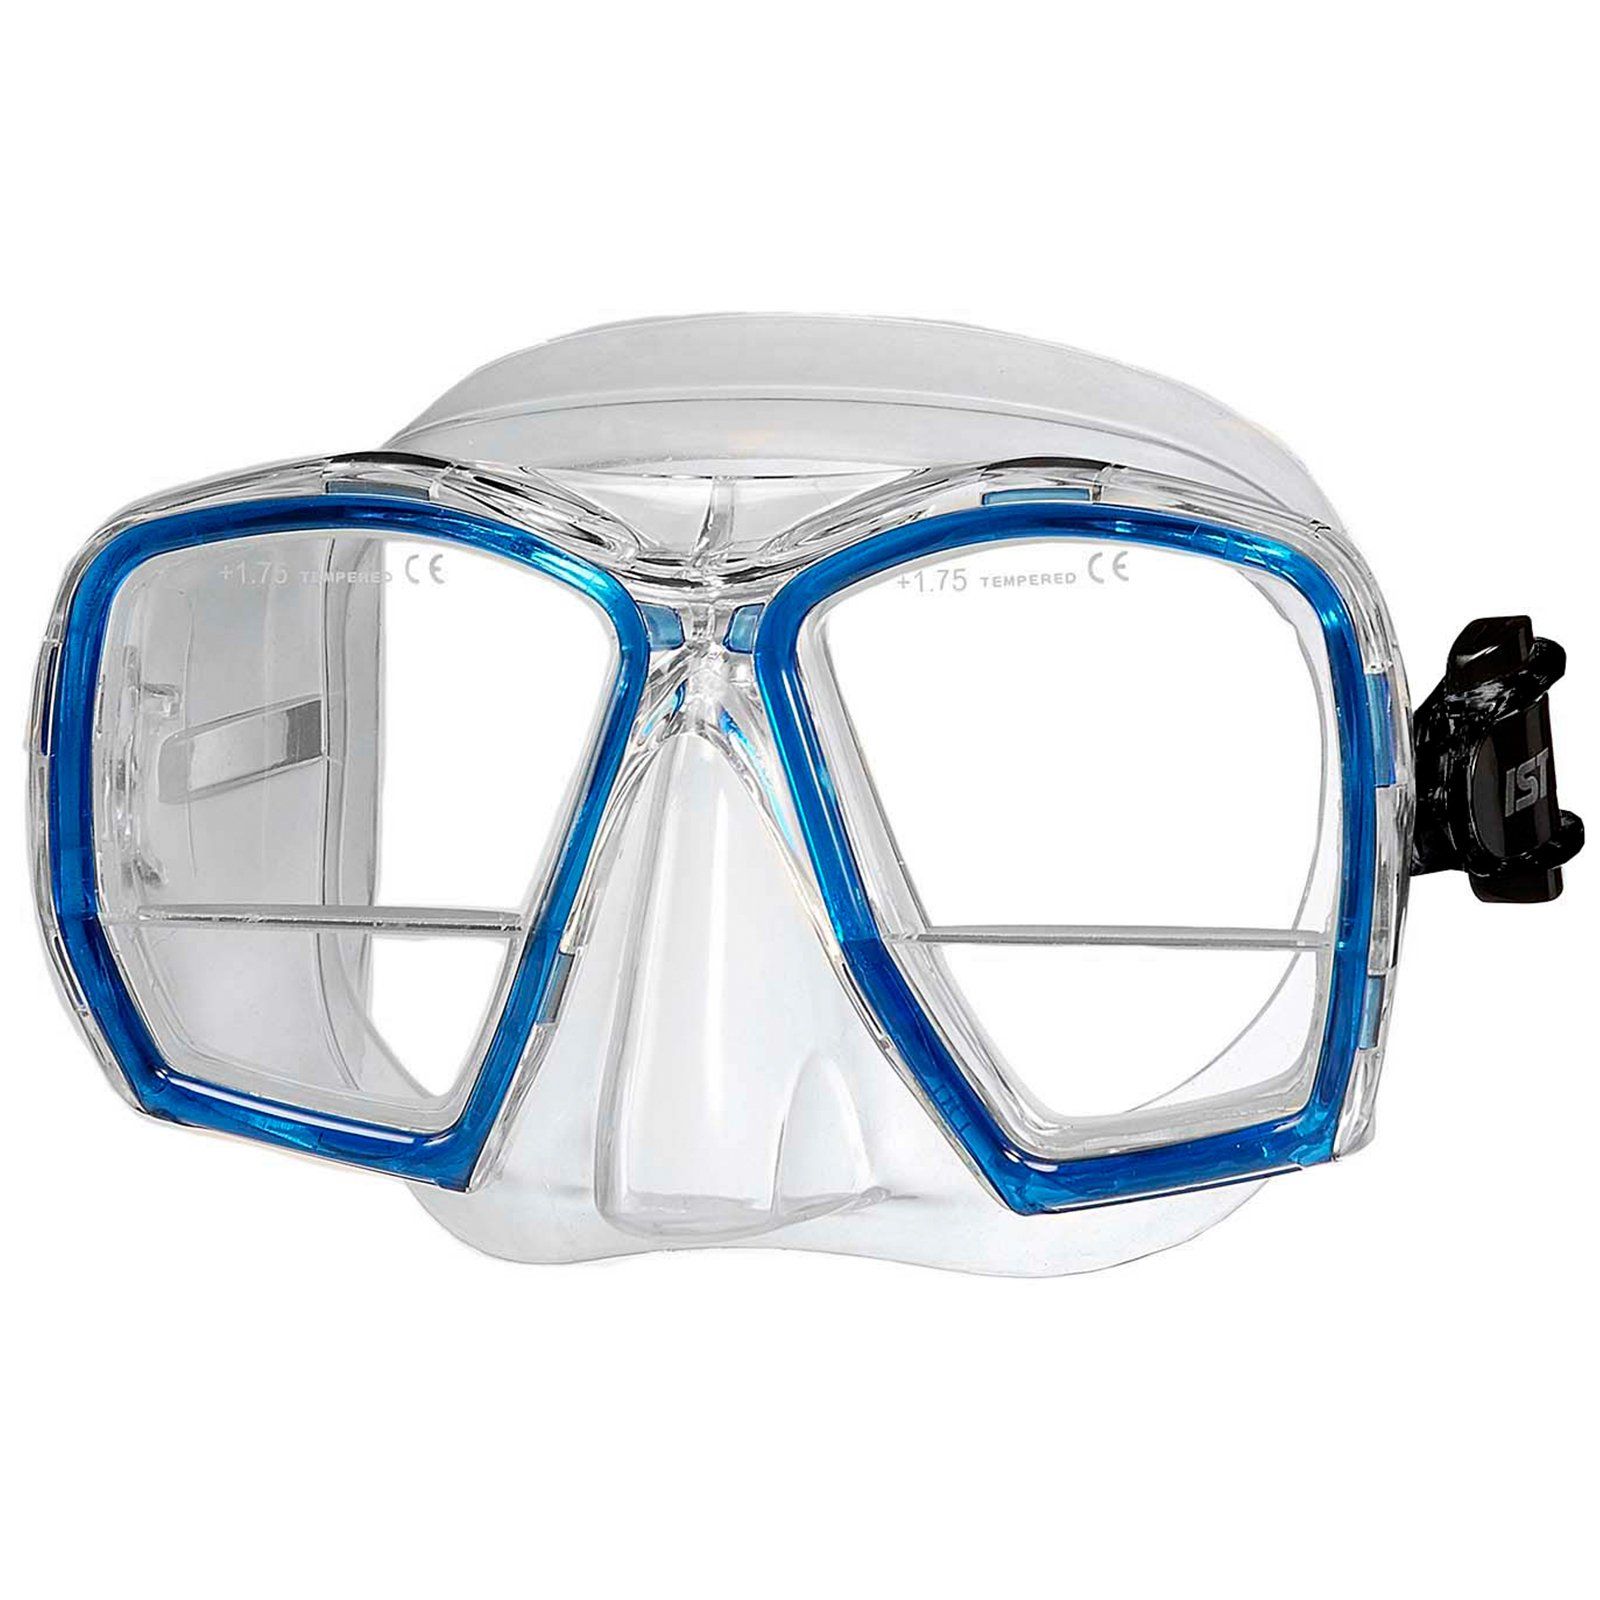 IST  Twin lens mask with built-in bifocal lens (+1.75).
Details from manufacturers site :-
Twin lens mask with built-in bifocal lens (+1.75).
¨          Magnifying lenses at an angle to improve downward vision providing magnification.
¨        Available in Black or Transparent with blue accent.
Having problems reading your instruments underwater .
This mask allows you to see them clearly again , the lenses allow a full view forwards with a plain glass being fitted , simply move your eyes to the bottom portion and by moving your instruments and adjusting the position they will instantly become clearer again
Comes complete with plastic IST box for storage .
 